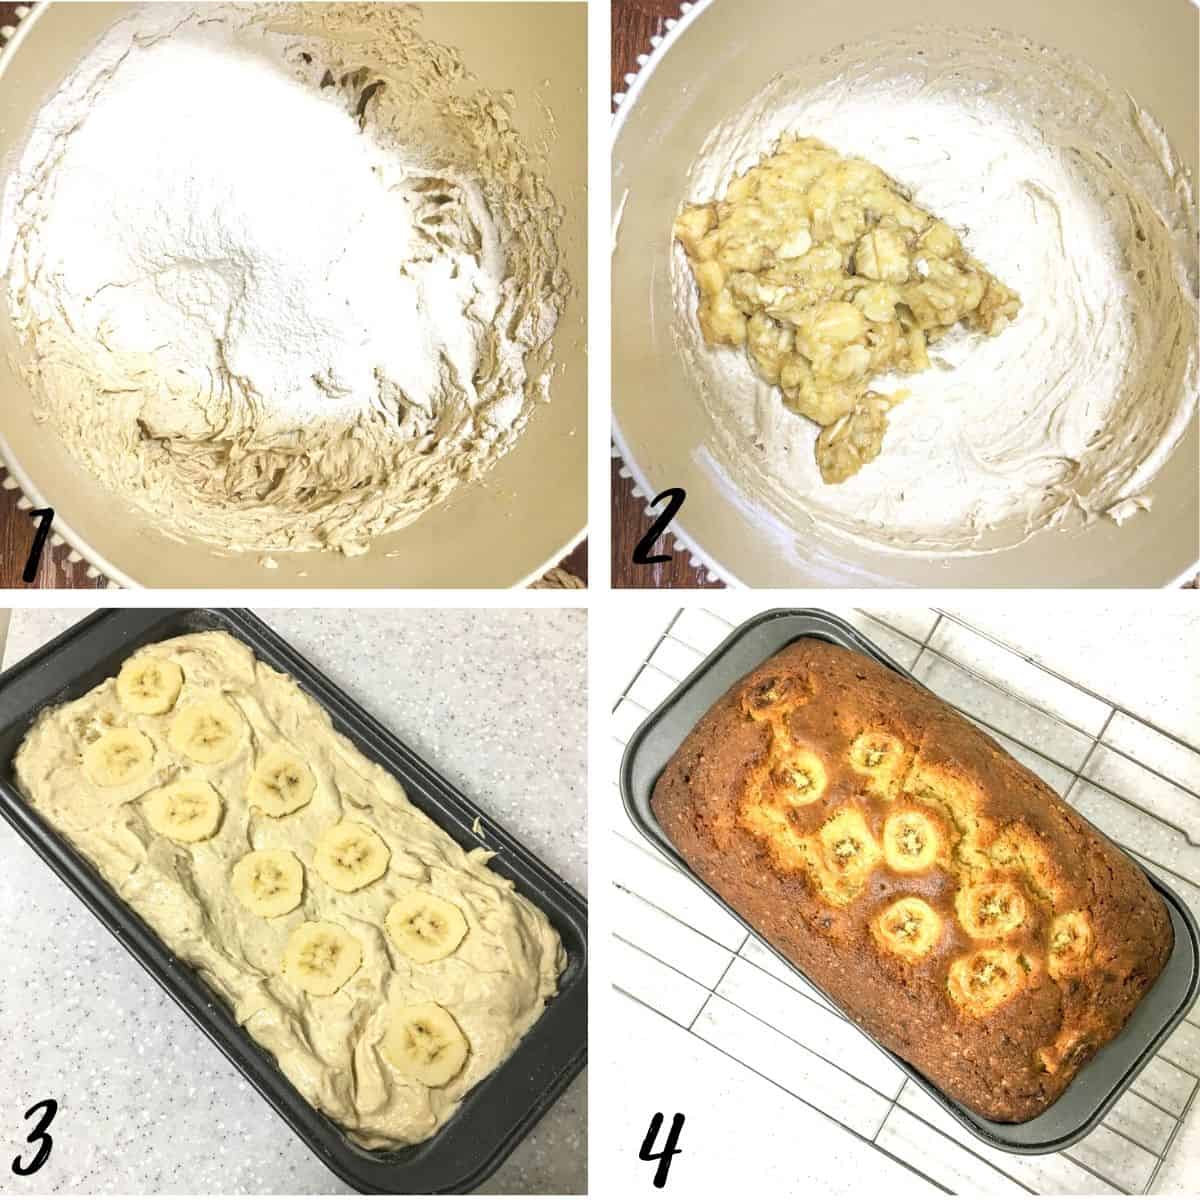 A poster of 4 images showing how to mix banana pound cake batter and fill it into a loaf pan.